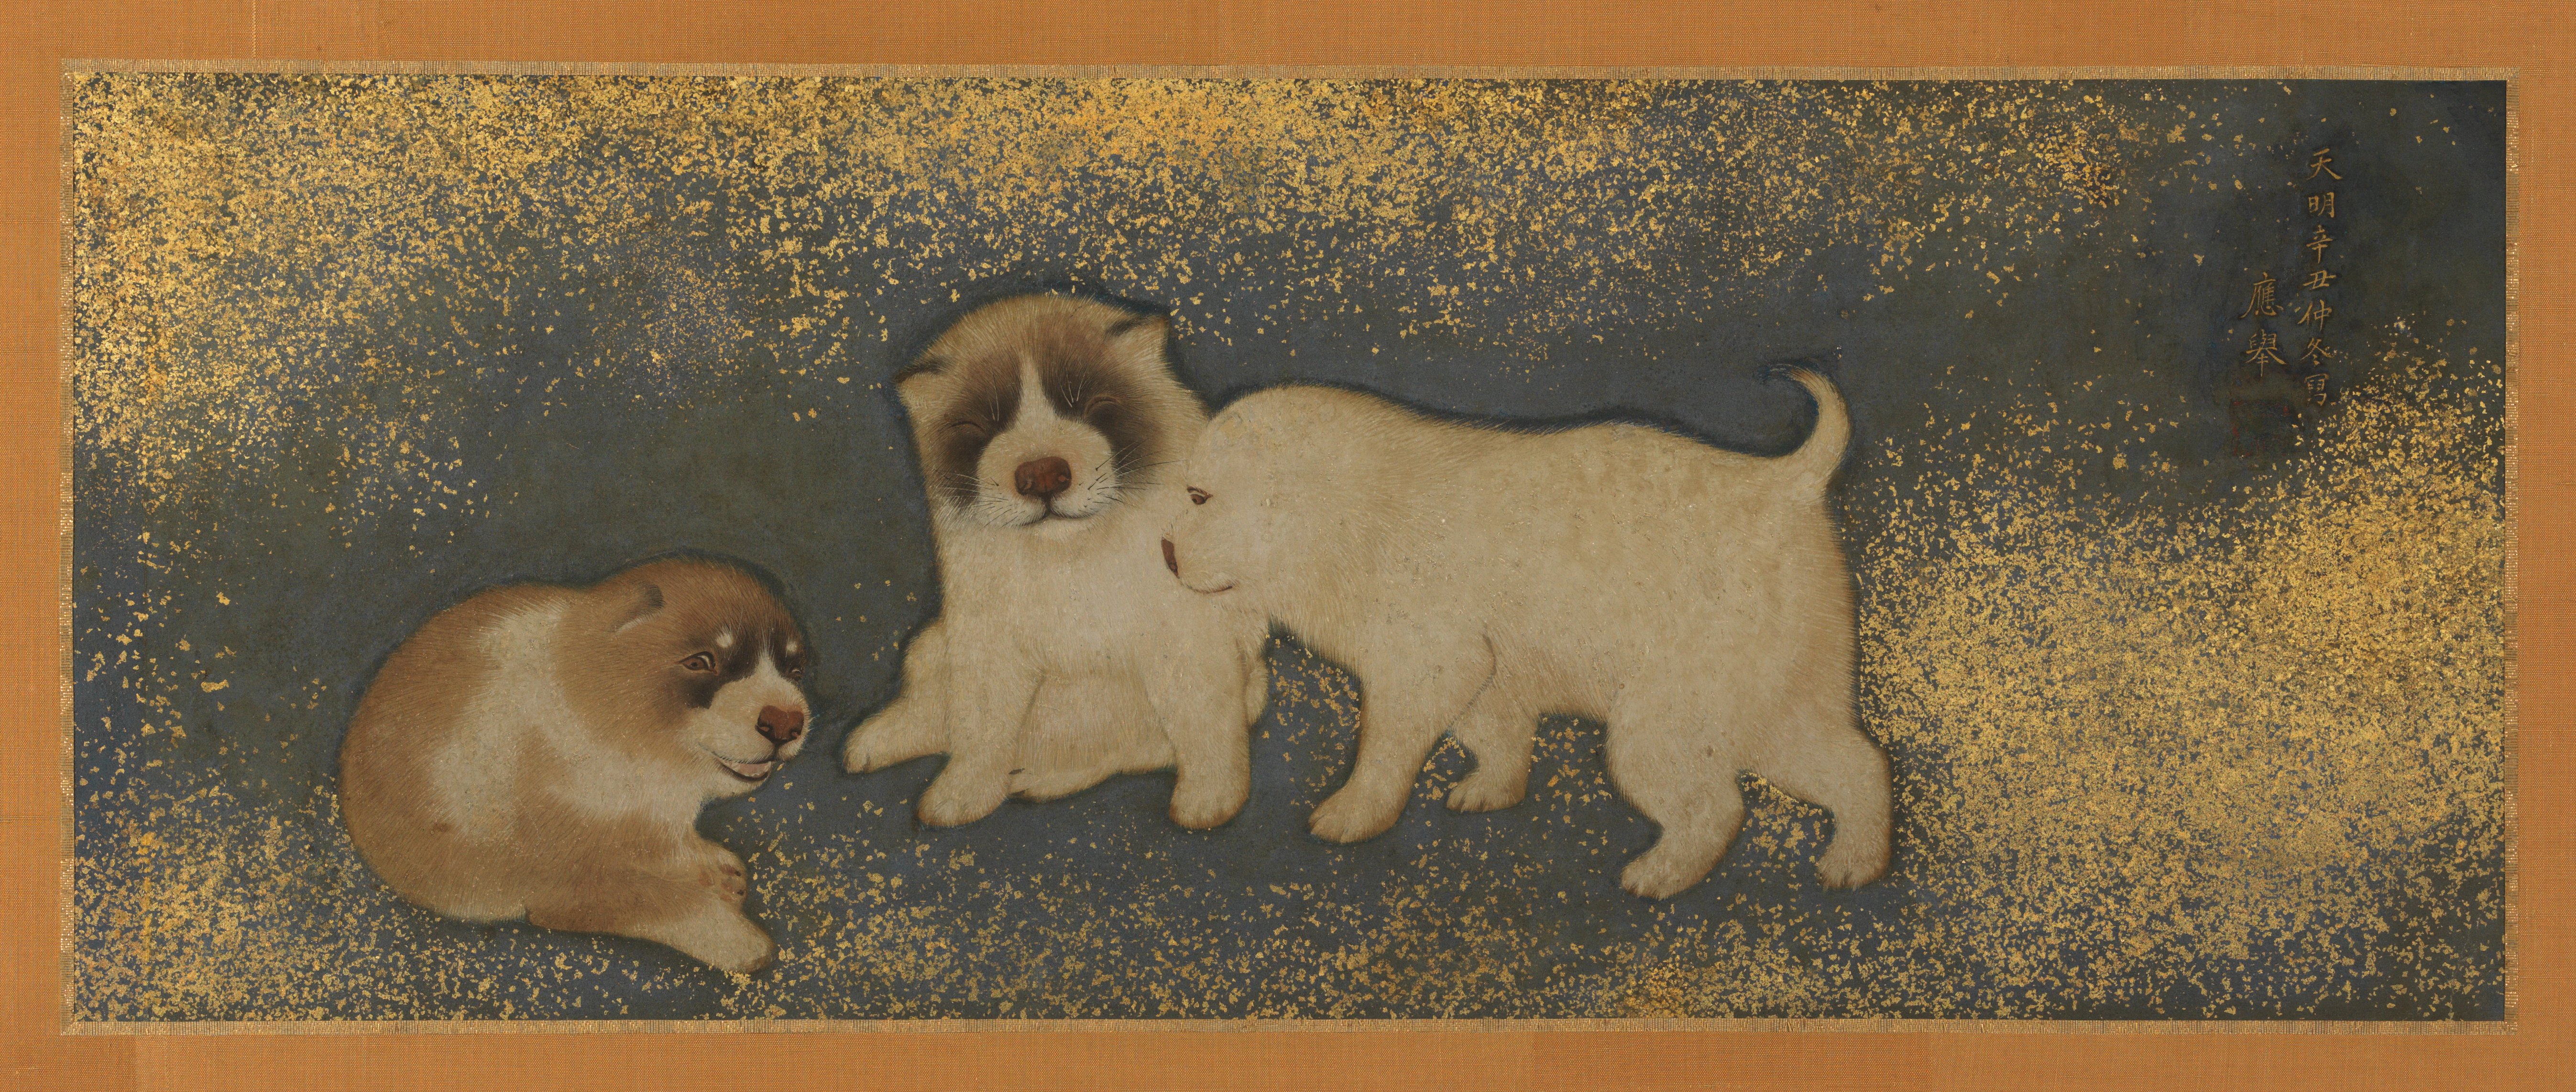 Chiots by Maruyama Ōkyo - 1781 - 24.45 × 63.18 cm Minneapolis Institute of Art